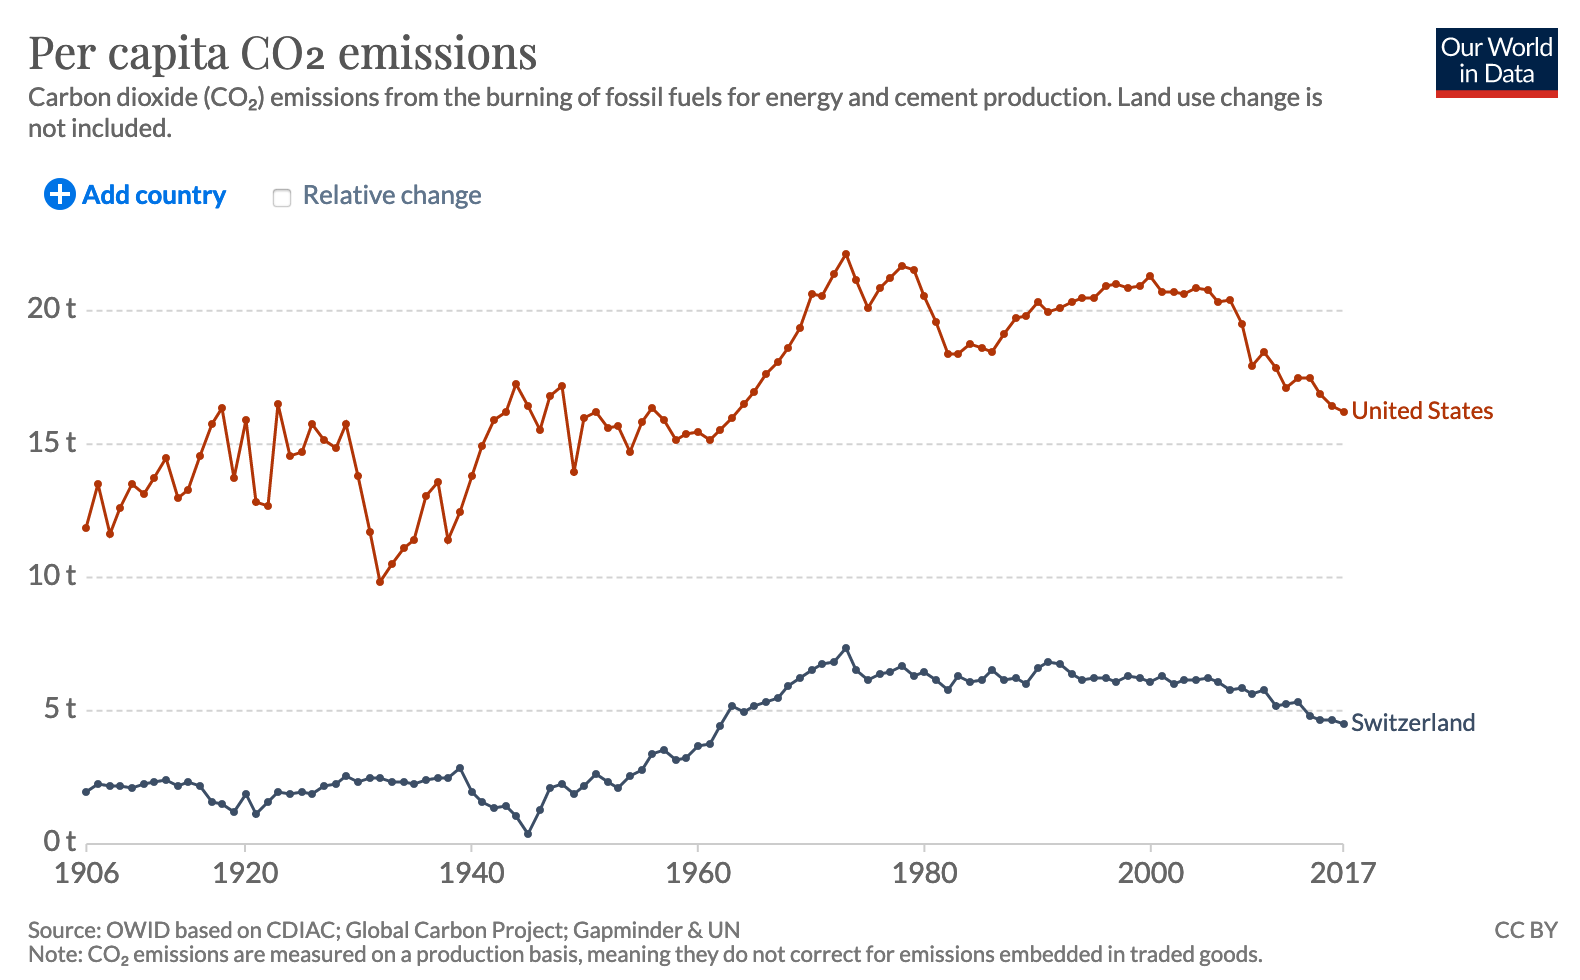 Per capita carbon dioxide emissions between the United States (high) and Switzerland (low). The United States emmissions overall are more erratic and high compared to Switzerland through the years. The last few years has seen a downward trend in the United States.